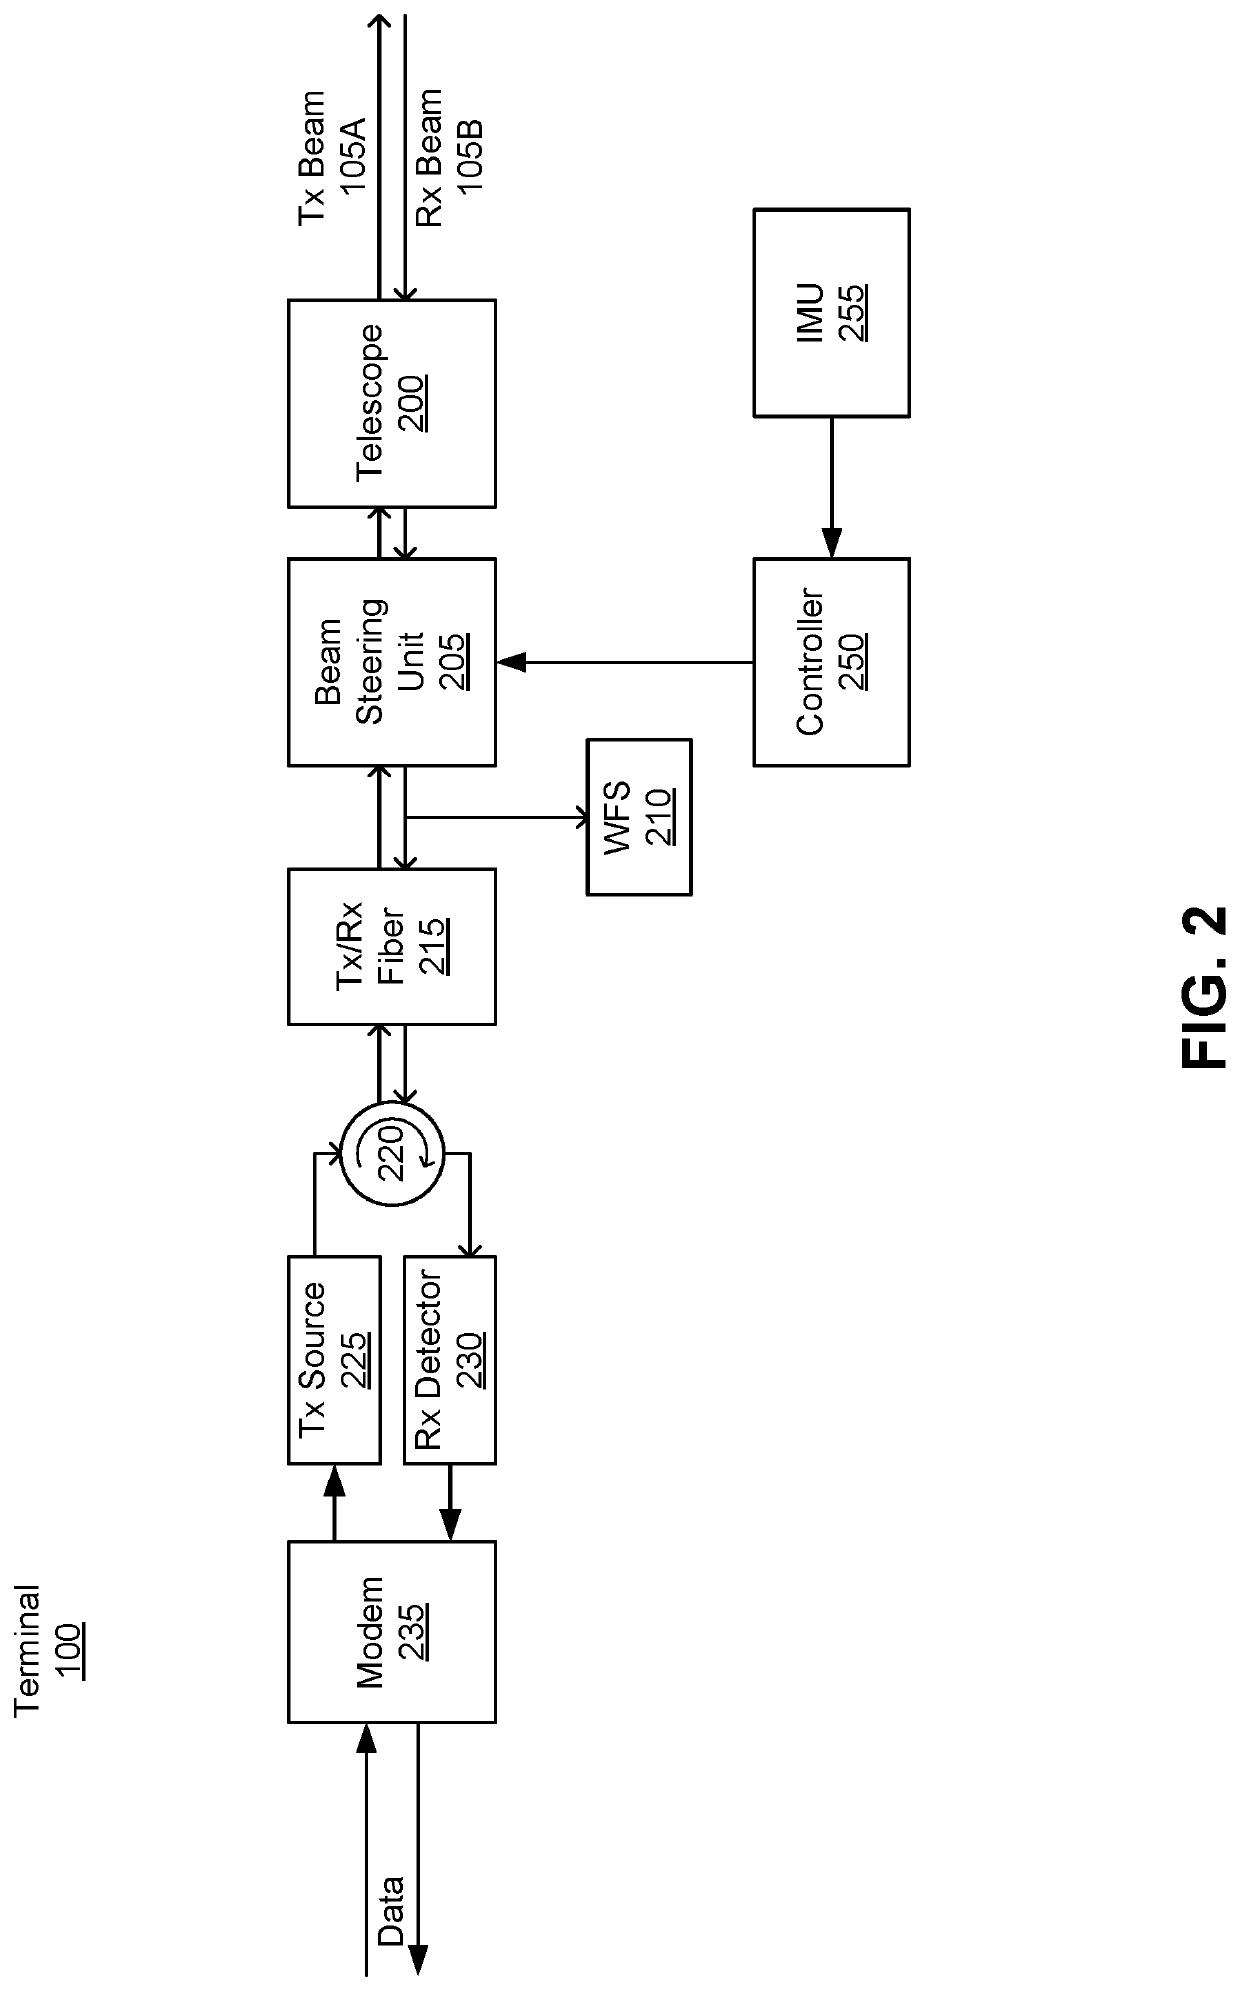 Feed-forward control of free space optical communication system based on inertial measurement unit